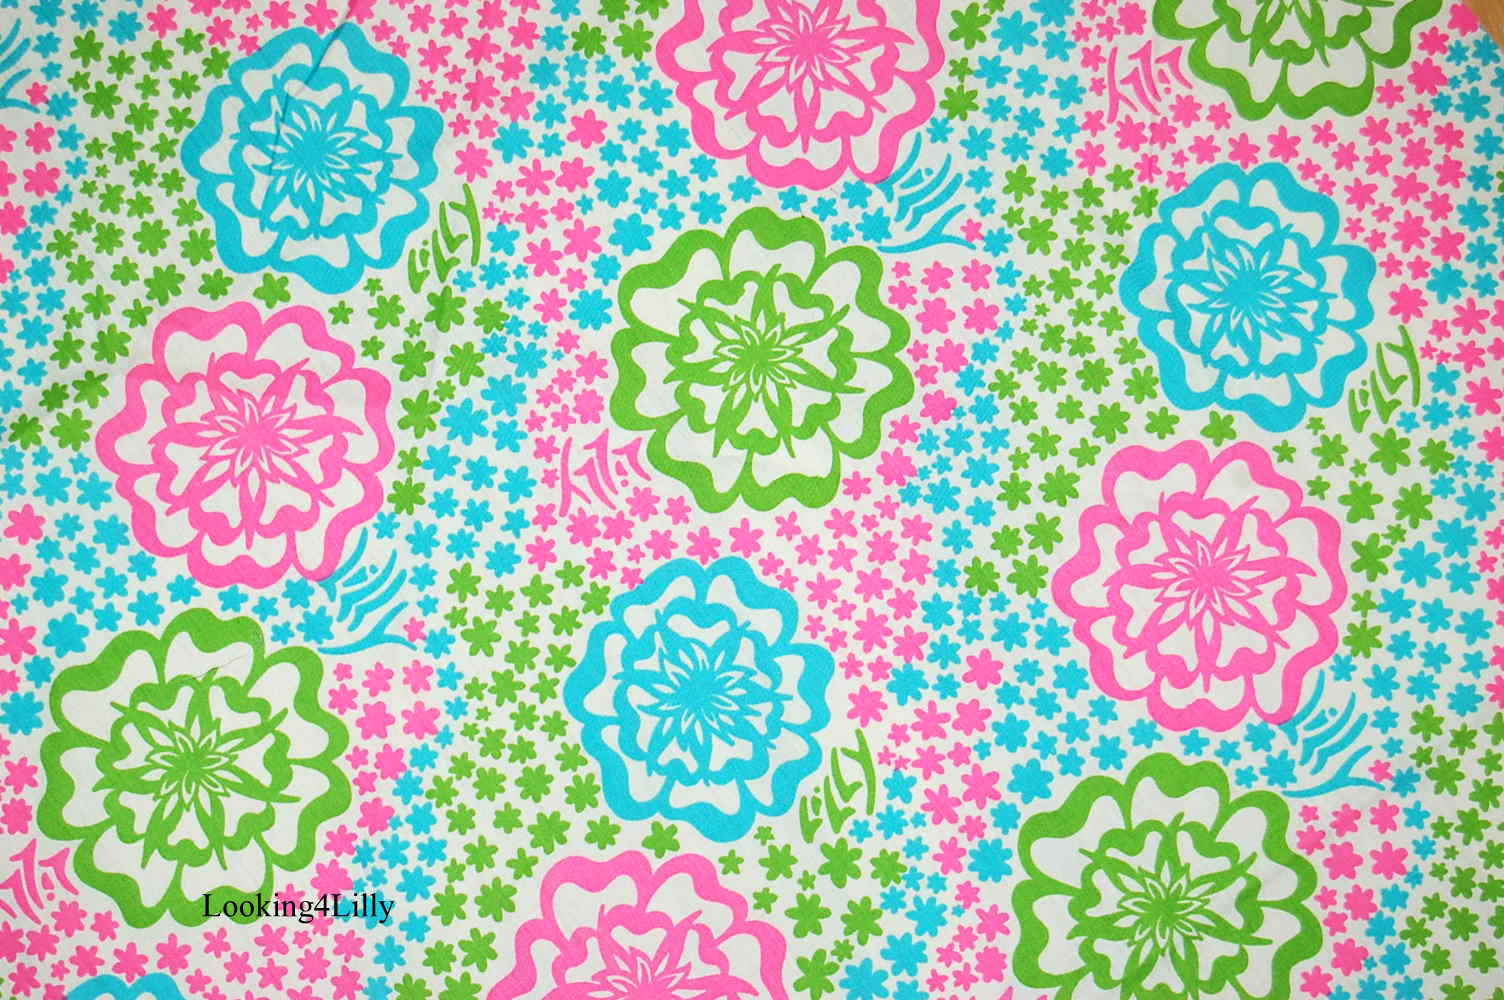 Image Lilly Pulitzer Fabric Pc Android iPhone And iPad Wallpaper